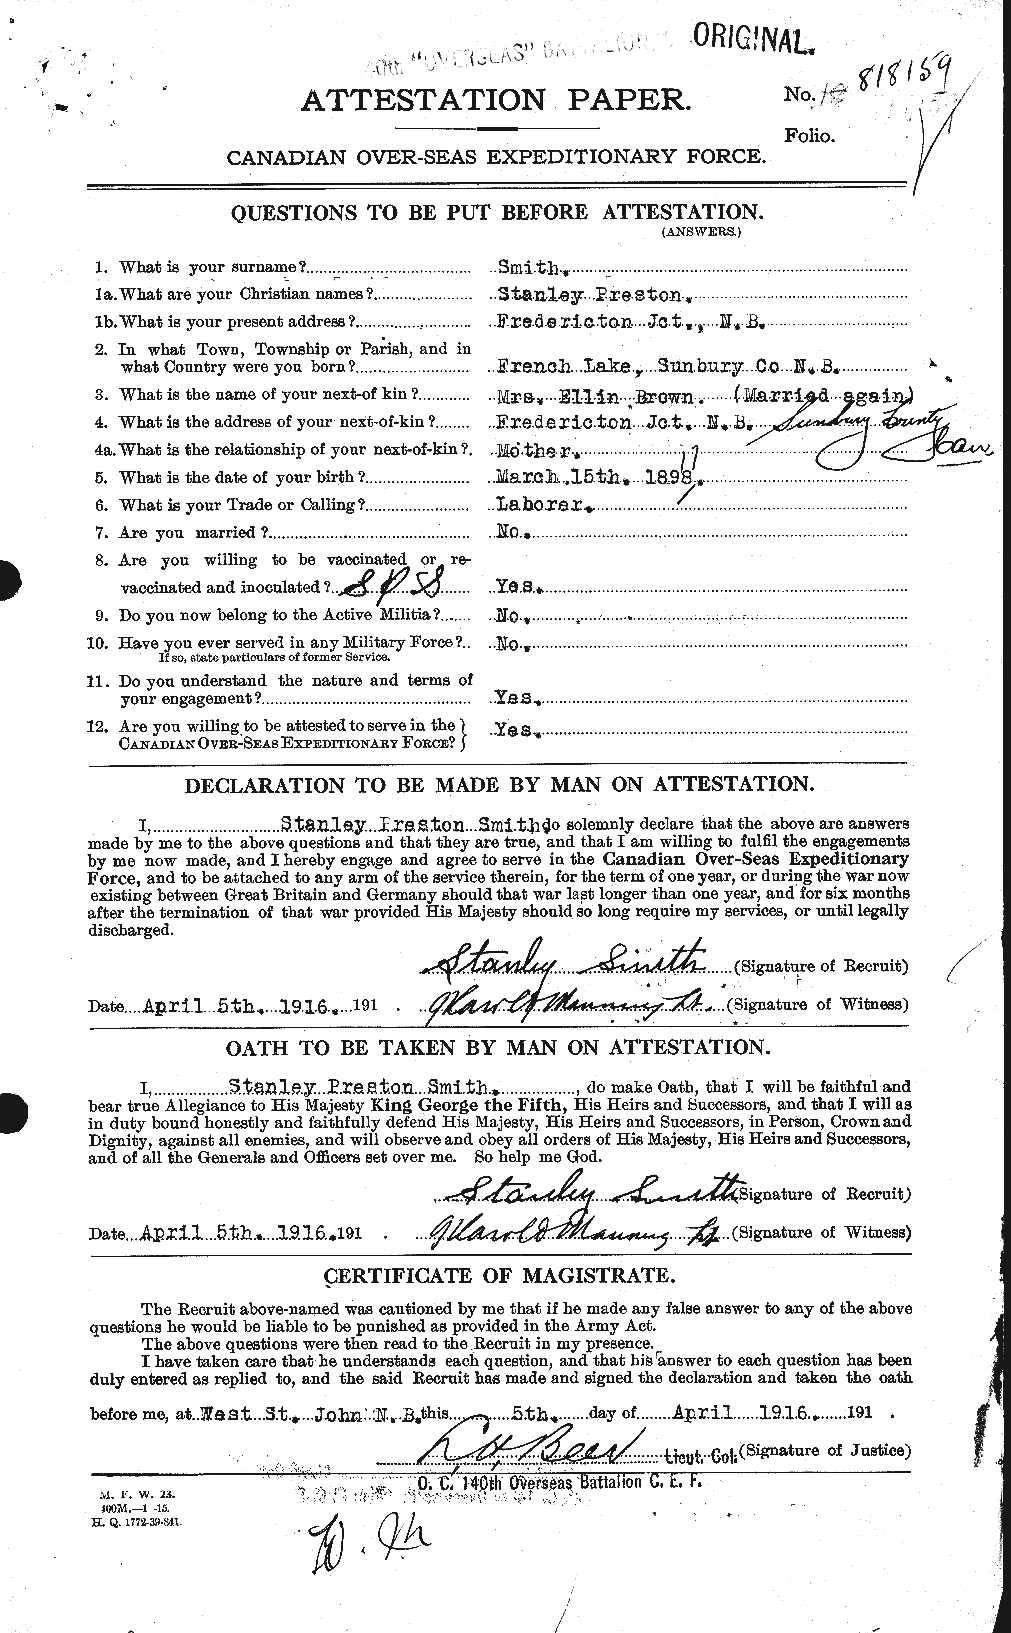 Personnel Records of the First World War - CEF 107380a